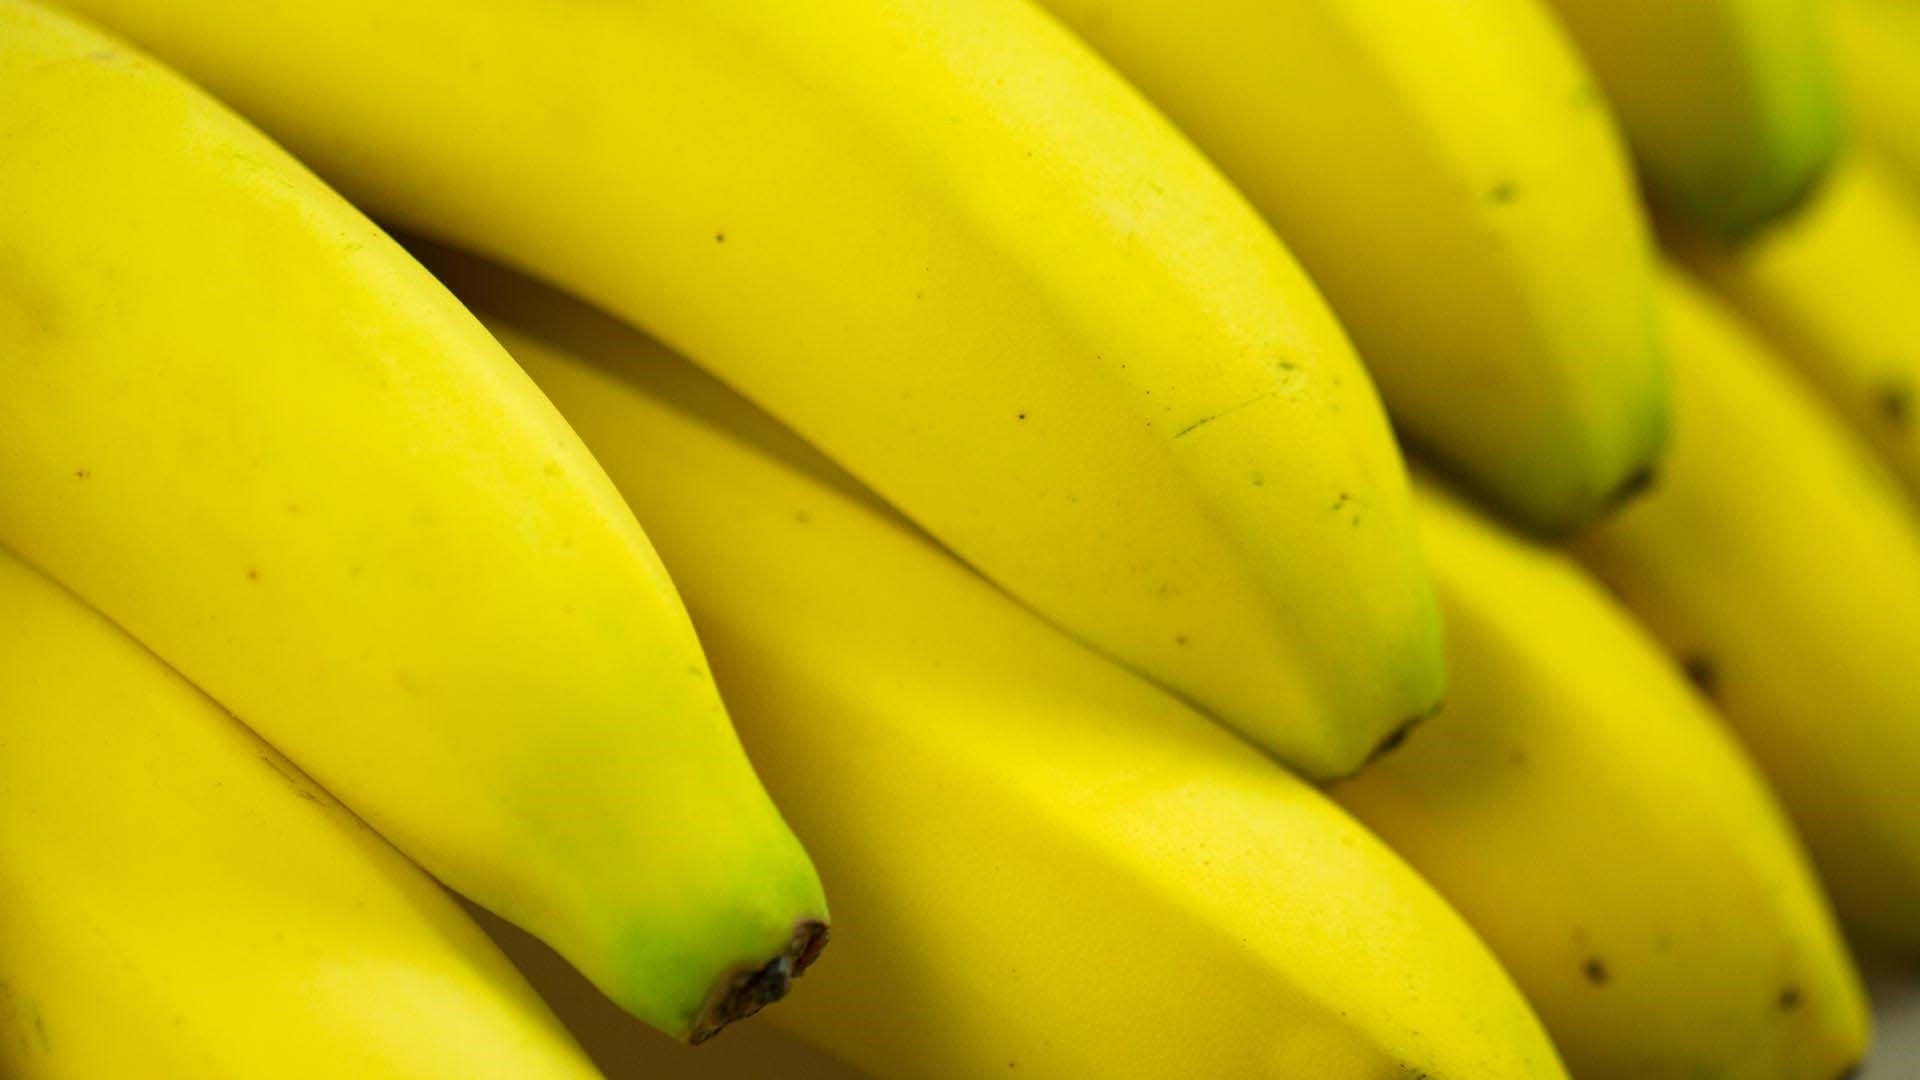 Banana collection, Diverse varieties, Wholesome goodness, Captivating visuals, 1920x1080 Full HD Desktop